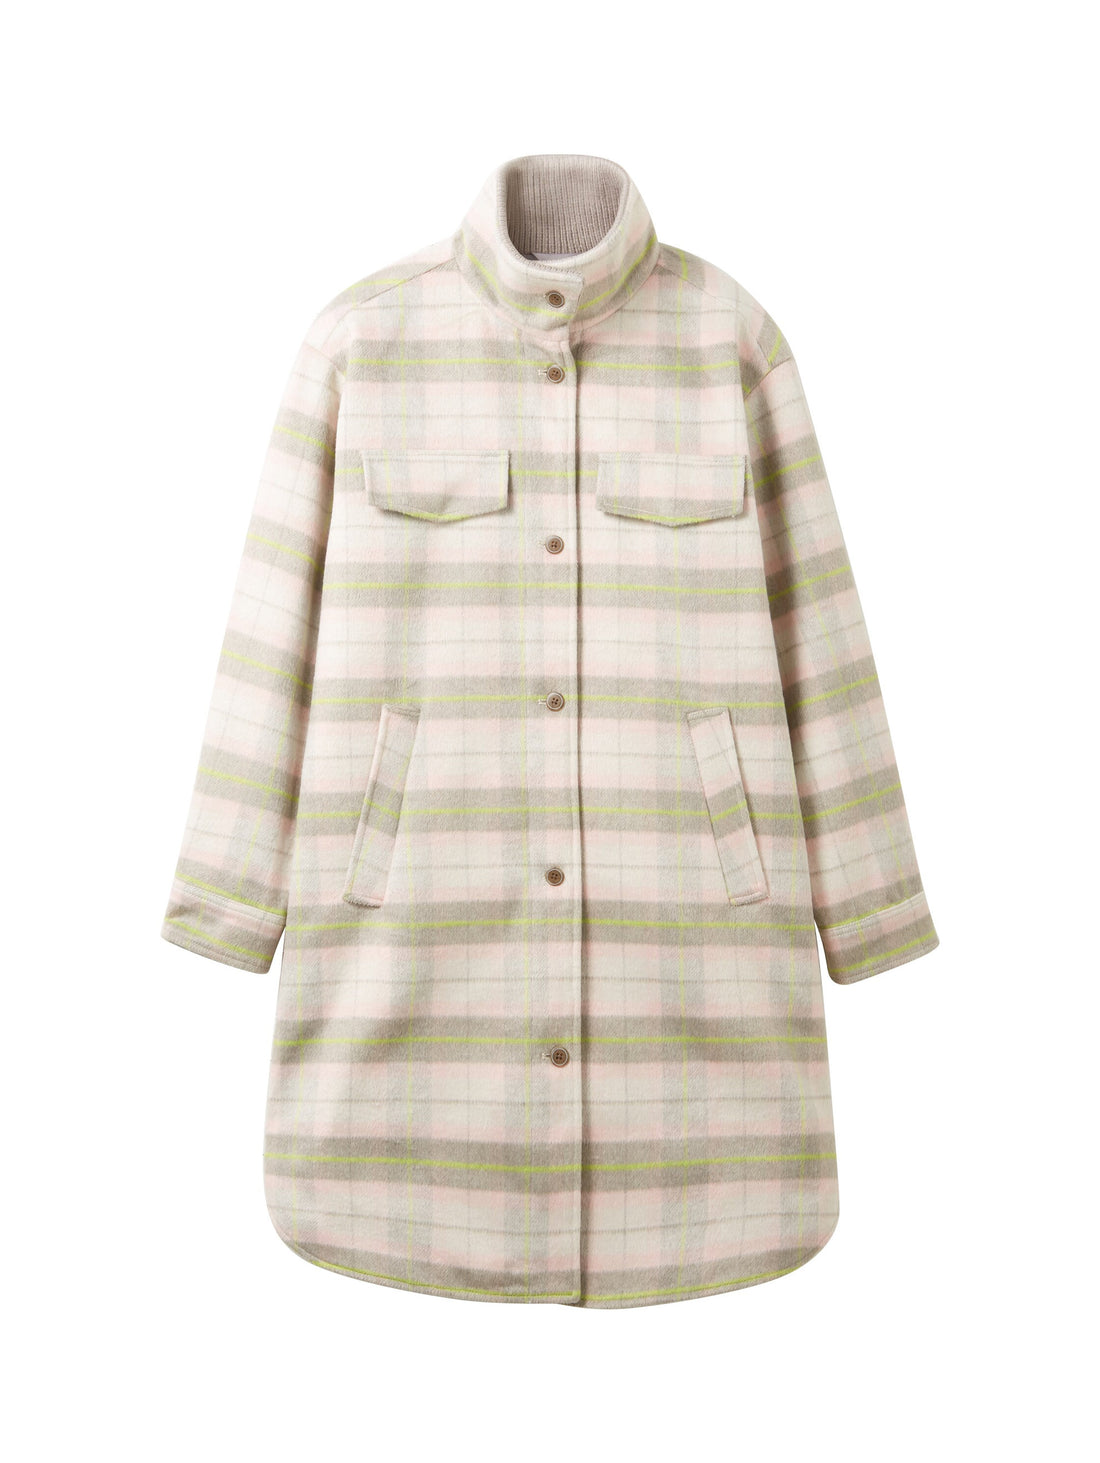 Checkered Coat With High Collar_1038686_32535_01